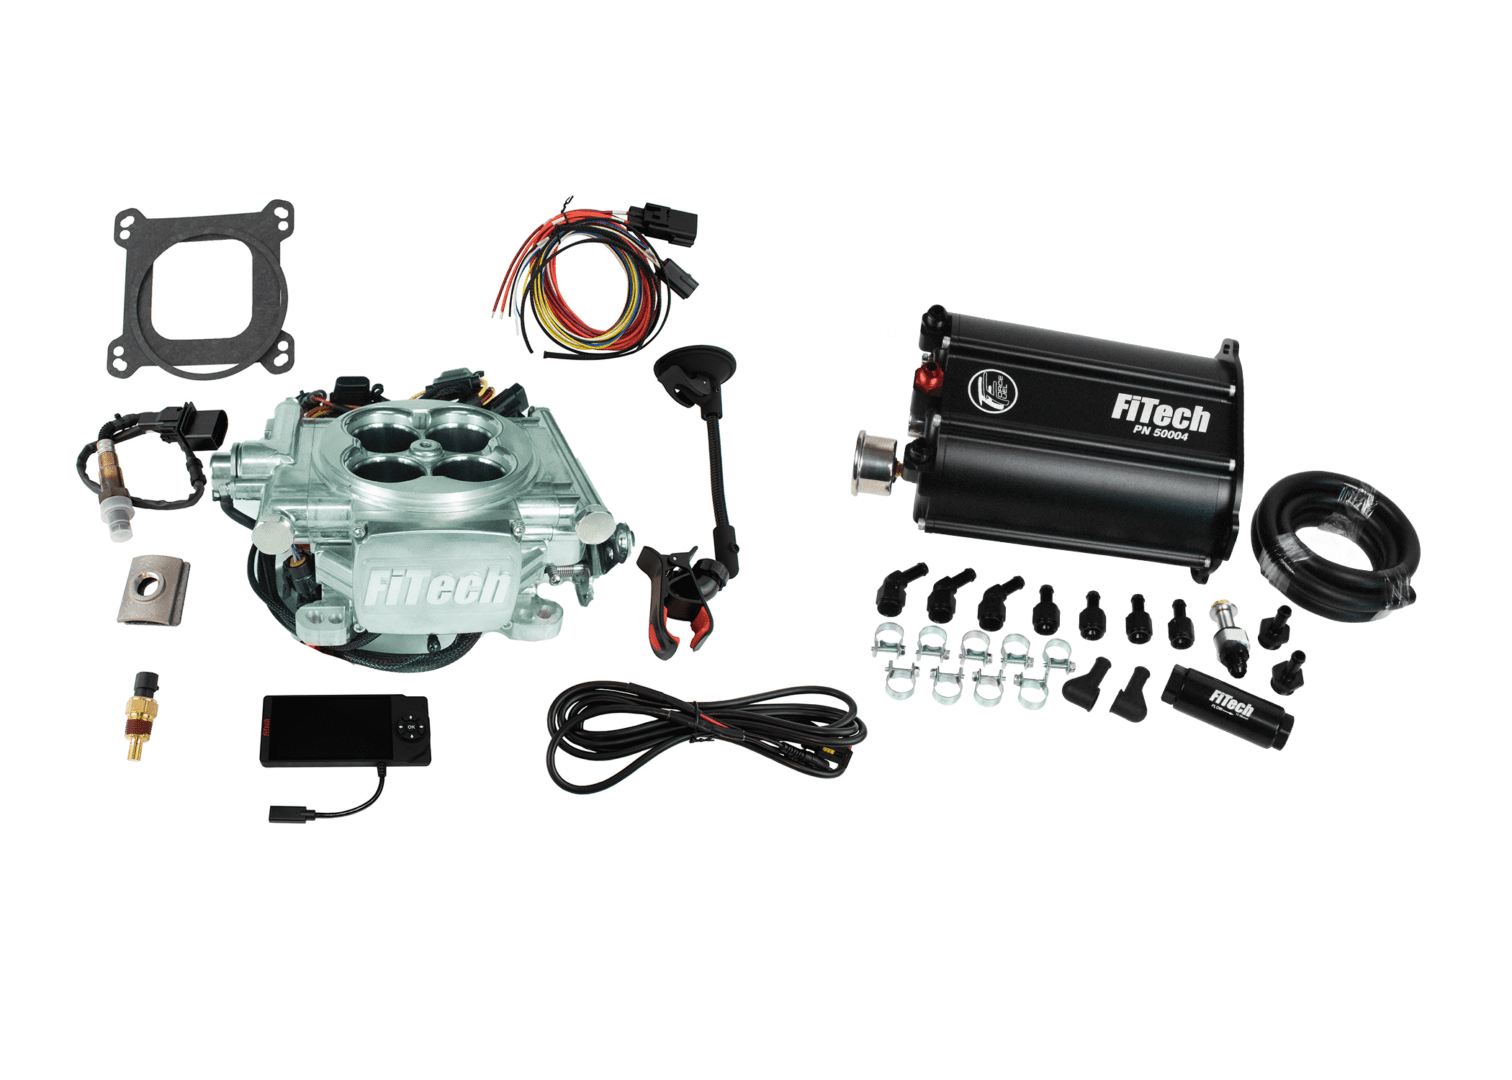 FiTech 35206 Go EFI 4 600 HP Power Adder Bright Alum EFI System w/ Force Fuel Delivery Master